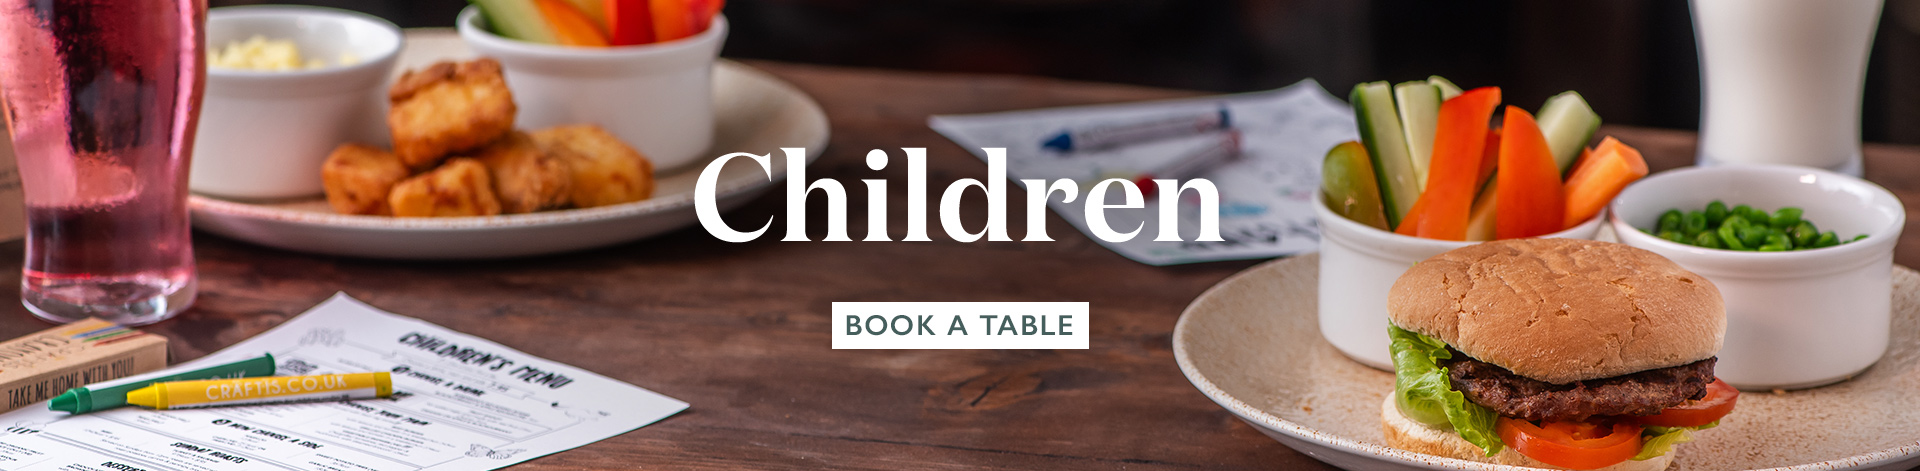 Children's Menu at The Hare and Hounds